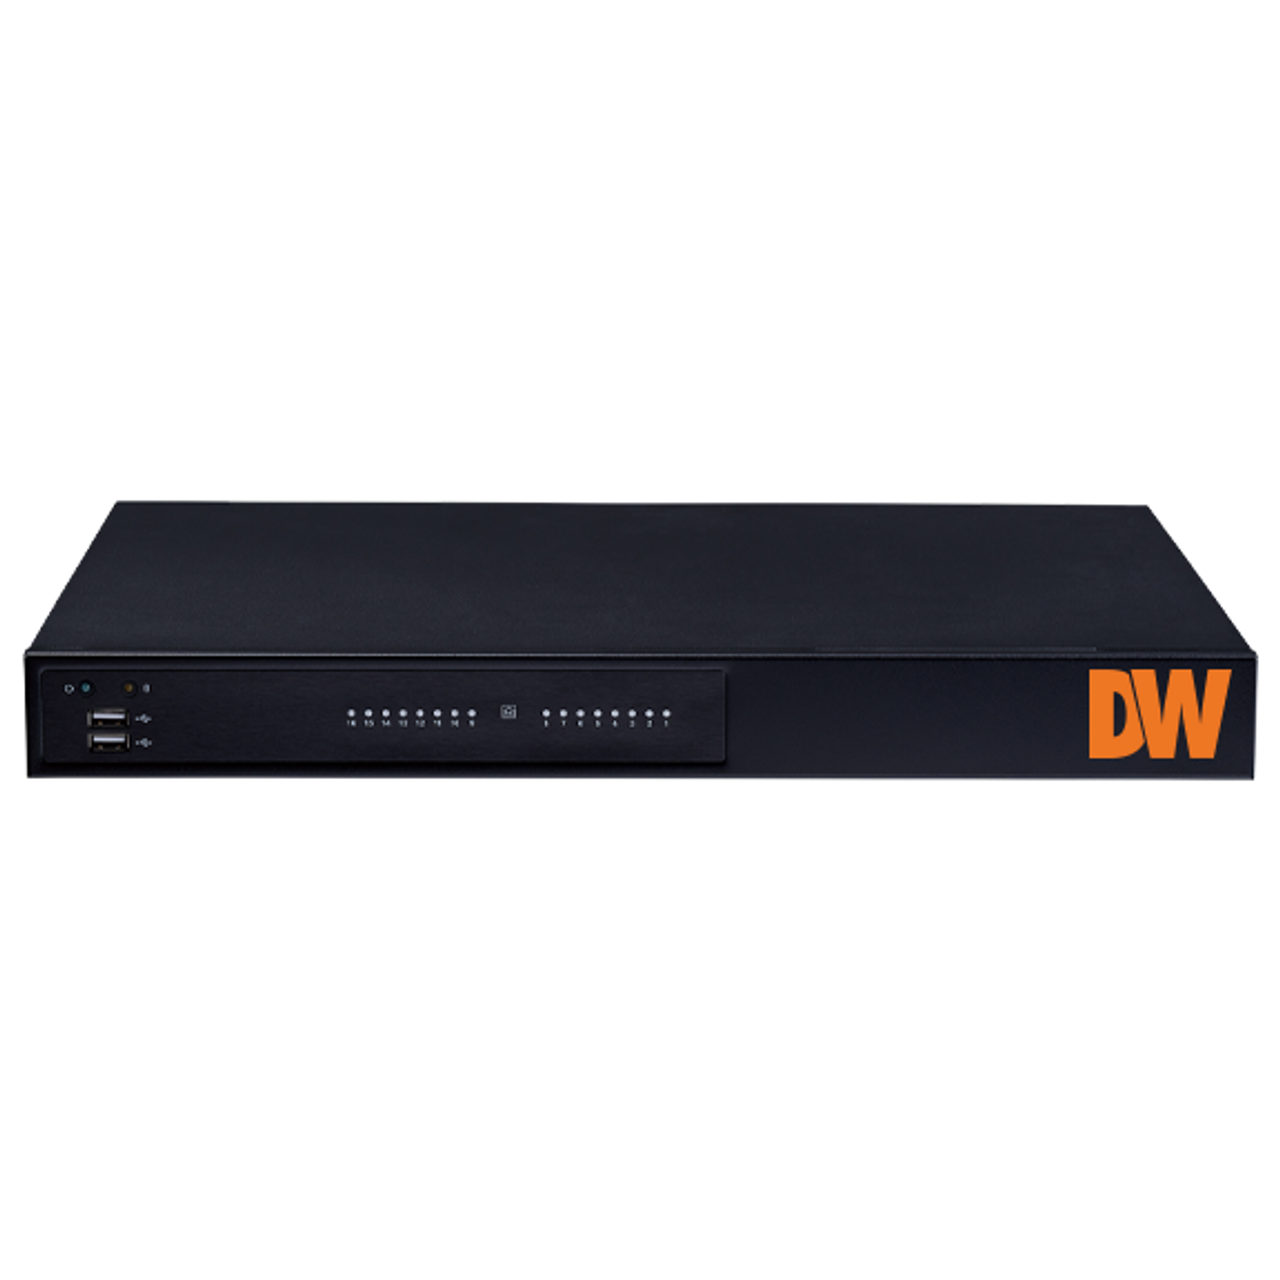 Digital Watchdog DW-BJCX24T-LX 24-Channel 80Mbps NVR with 16 PoE Ports, 24TB HDD